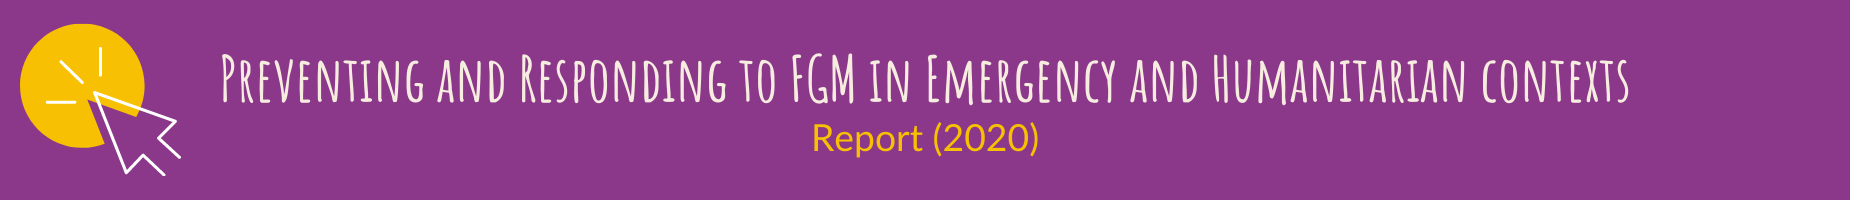 Preventing and Responding to FGM in Emergency and Humanitarian contexts - Report (2020)